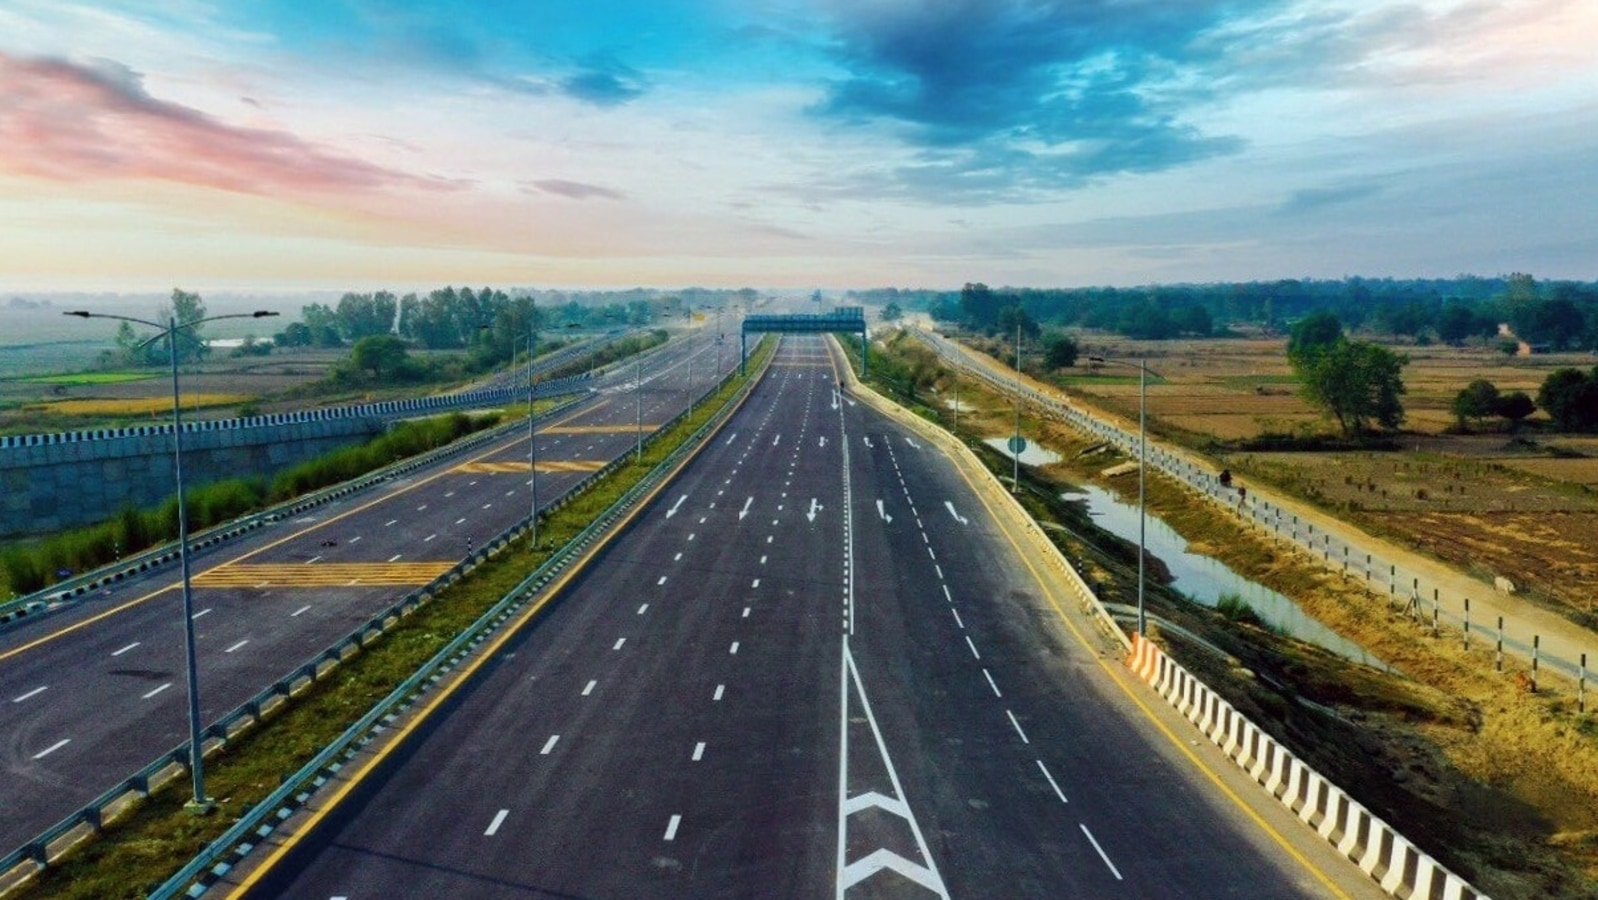 Over 300km, 6 lanes: All about Purvanchal Expressway PM Modi will inaugurate today | Latest News India - Hindustan Times